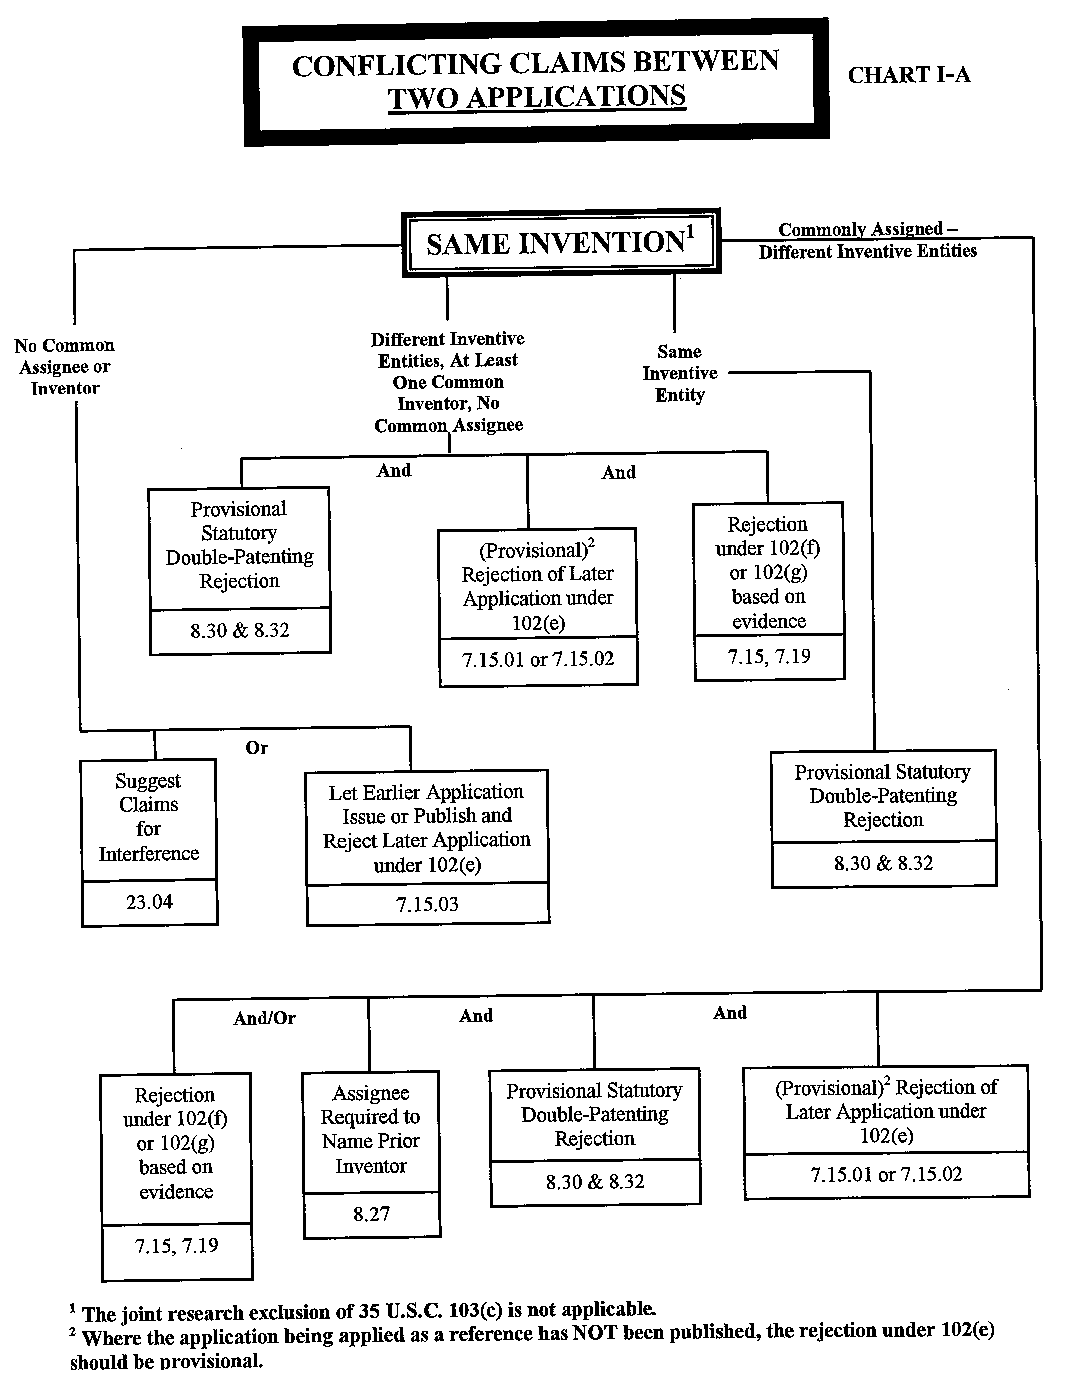 flowchart for two applications, same invention, with conflicting claims